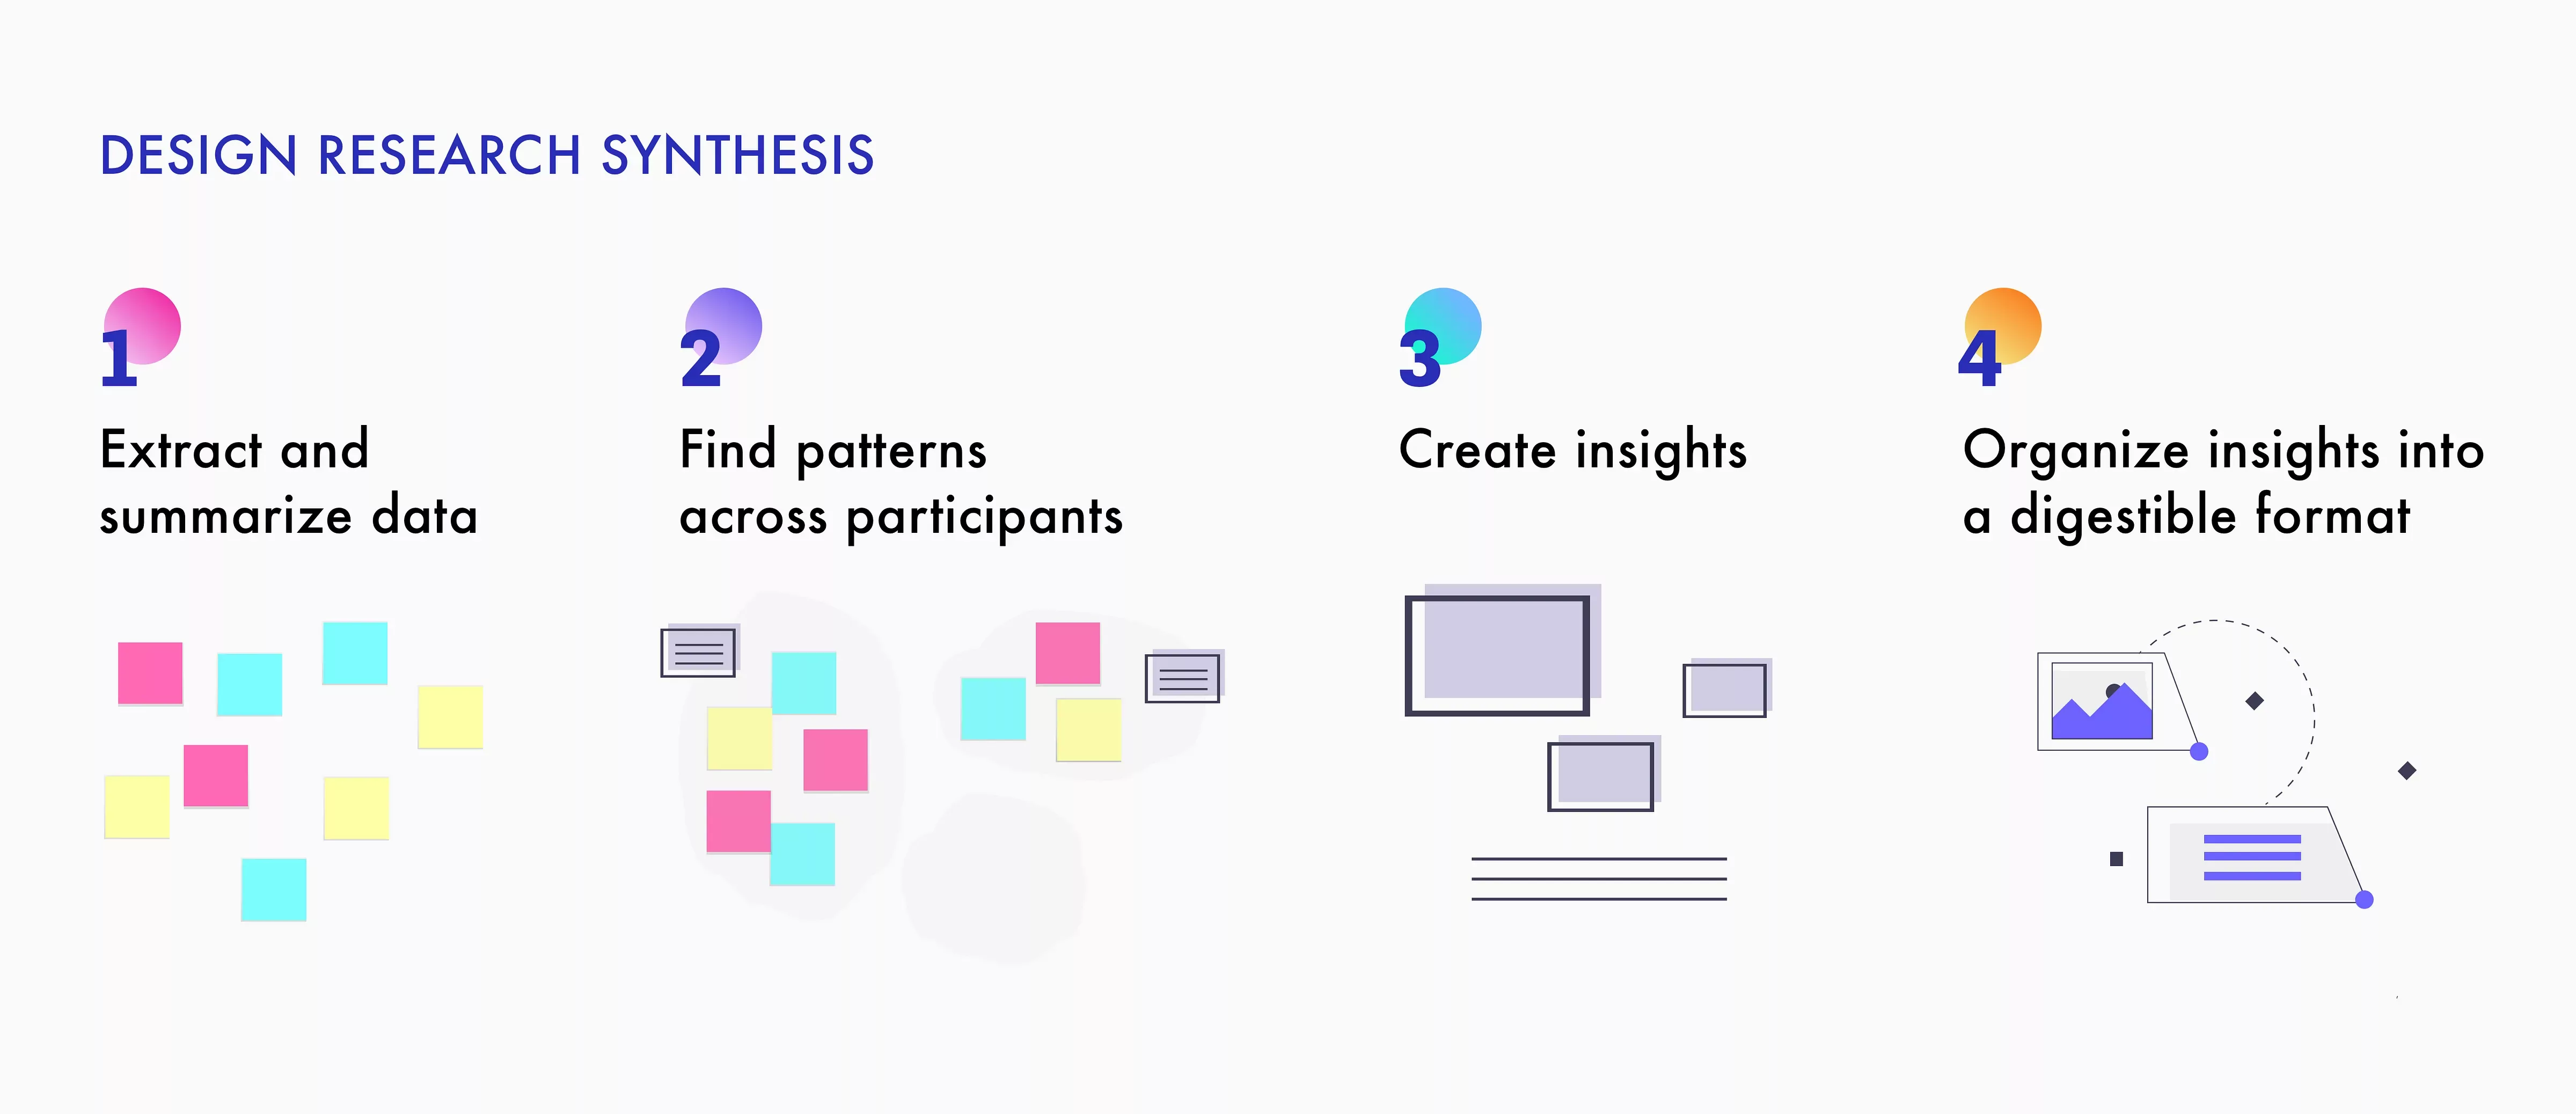 An image that details the design research synthesis process into four steps: 1 extract and sumarize data. 2 Find patterns across participants. 3 Create insights and 4 Organize insights into a digestible format.